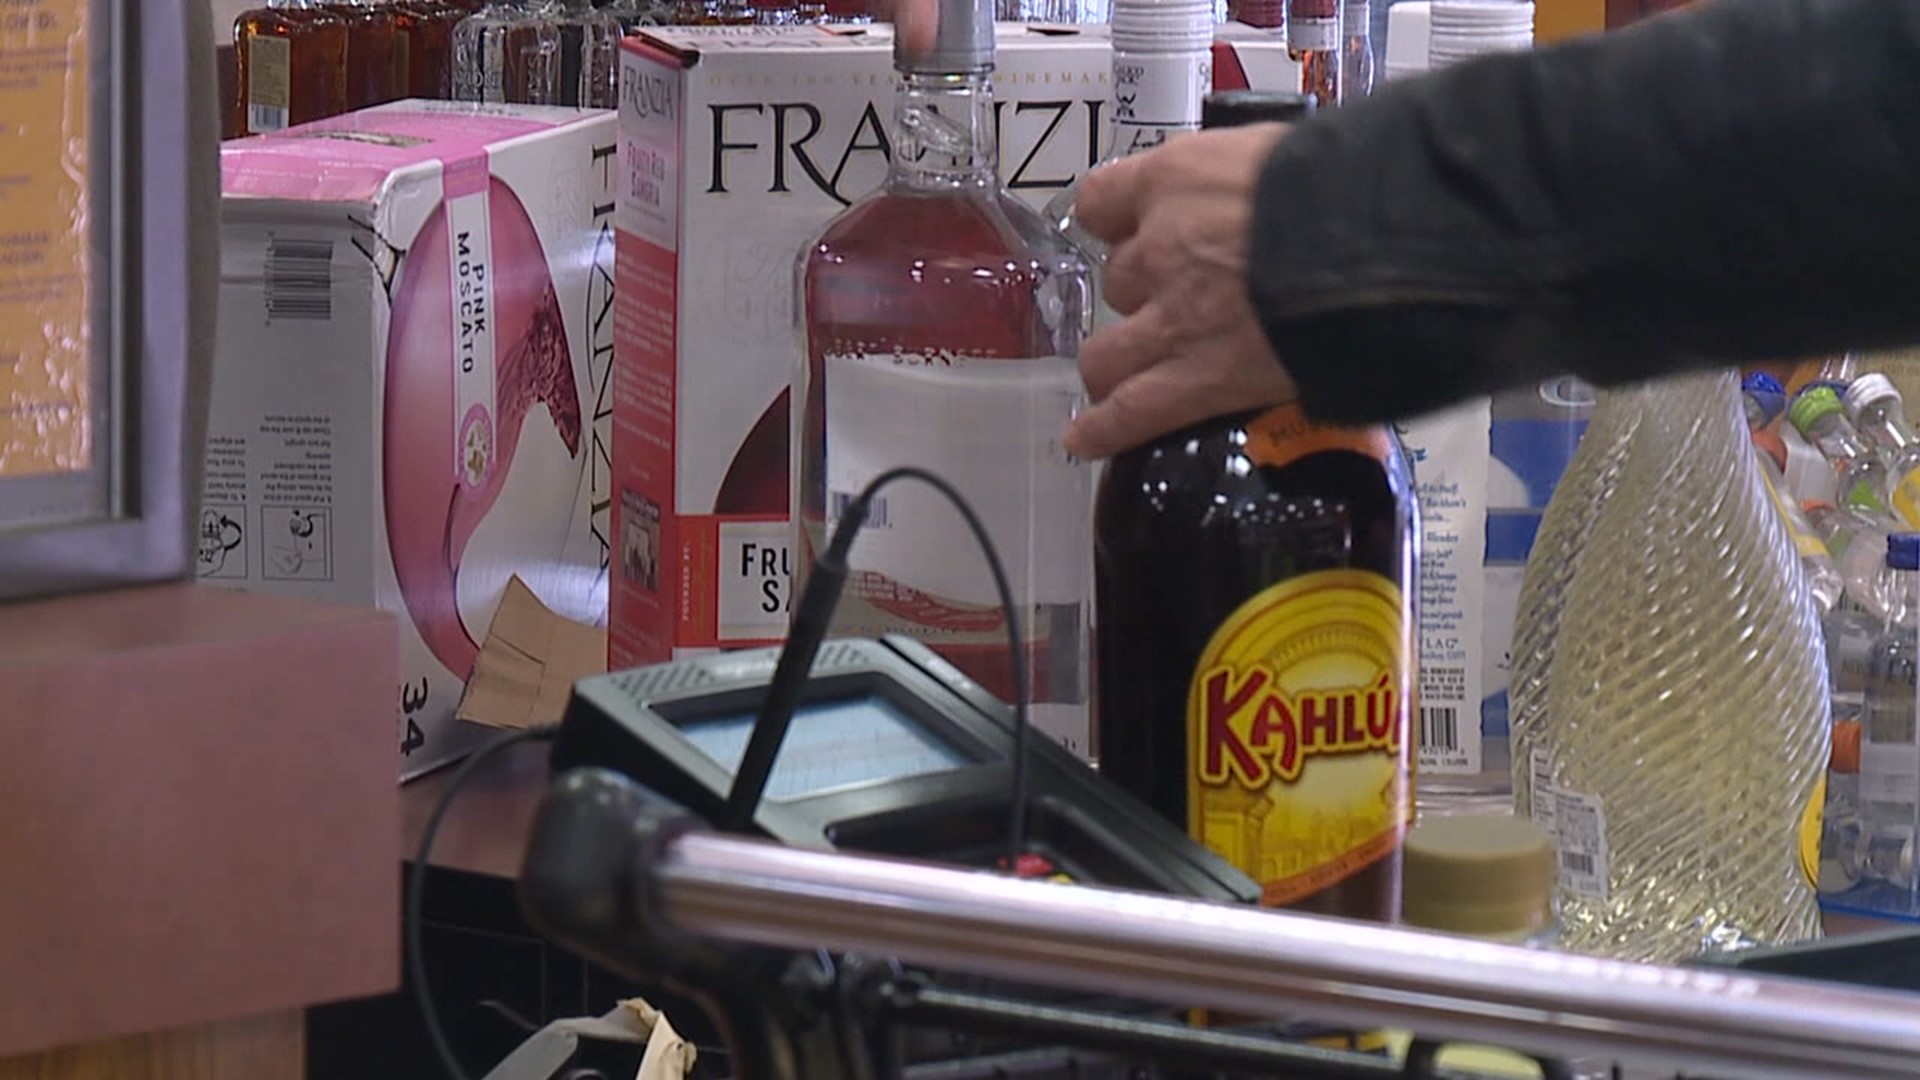 The Pennsylvania Liquor Control Board reports its largest annual sales increase in history.